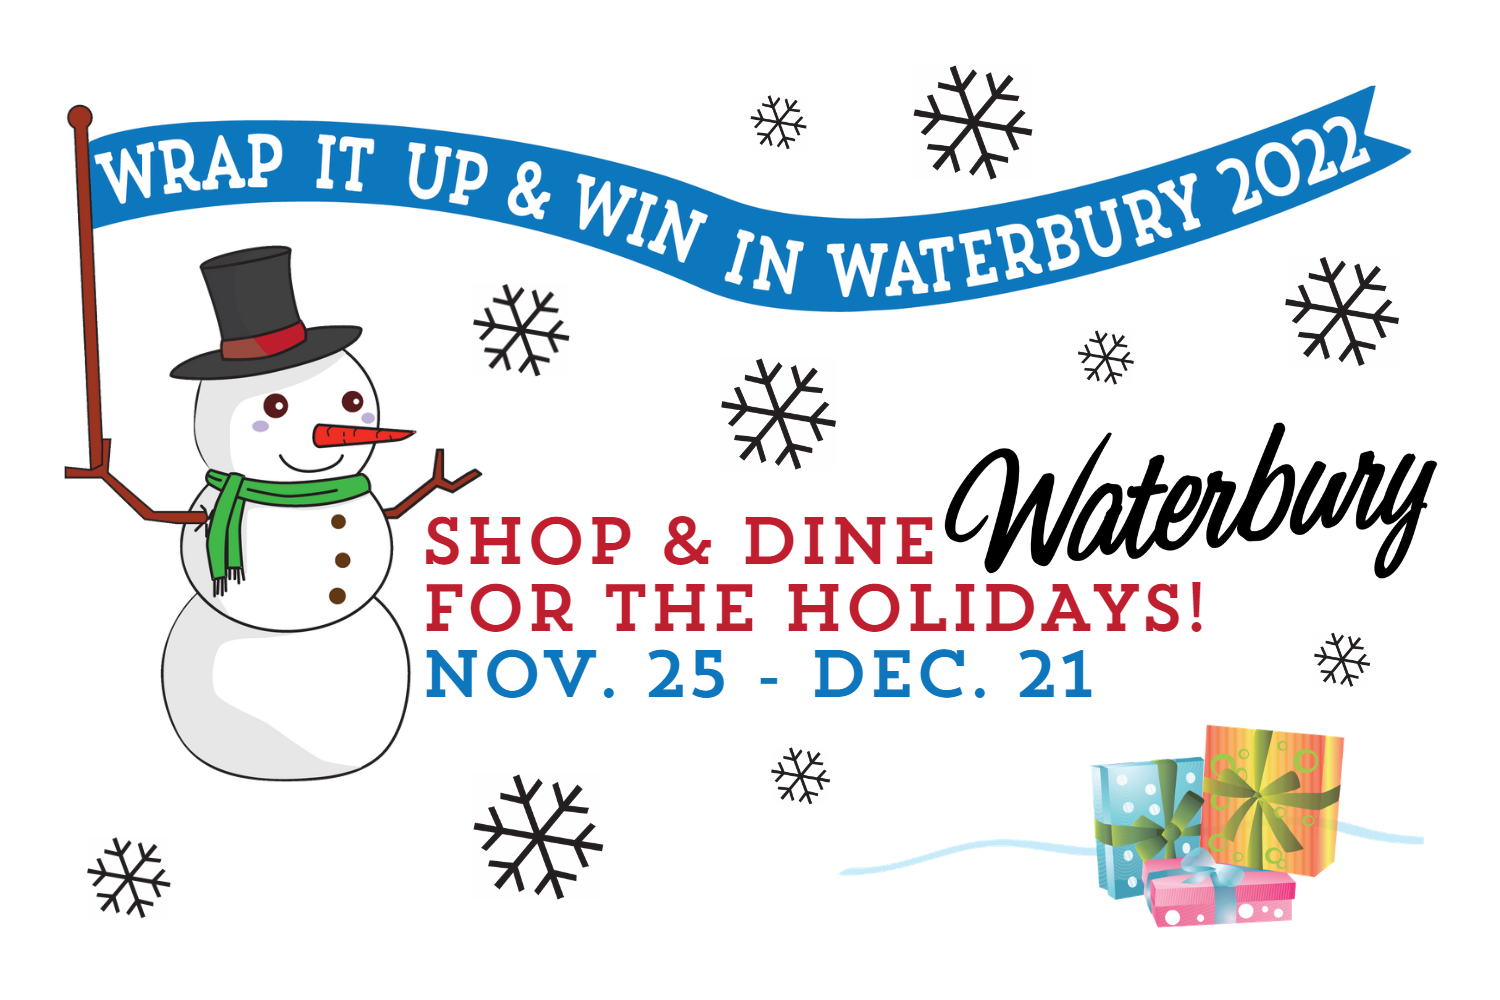 Graphic saying "Wrap It Up & Win, Shop & Dine Nov 25 to Dec 21